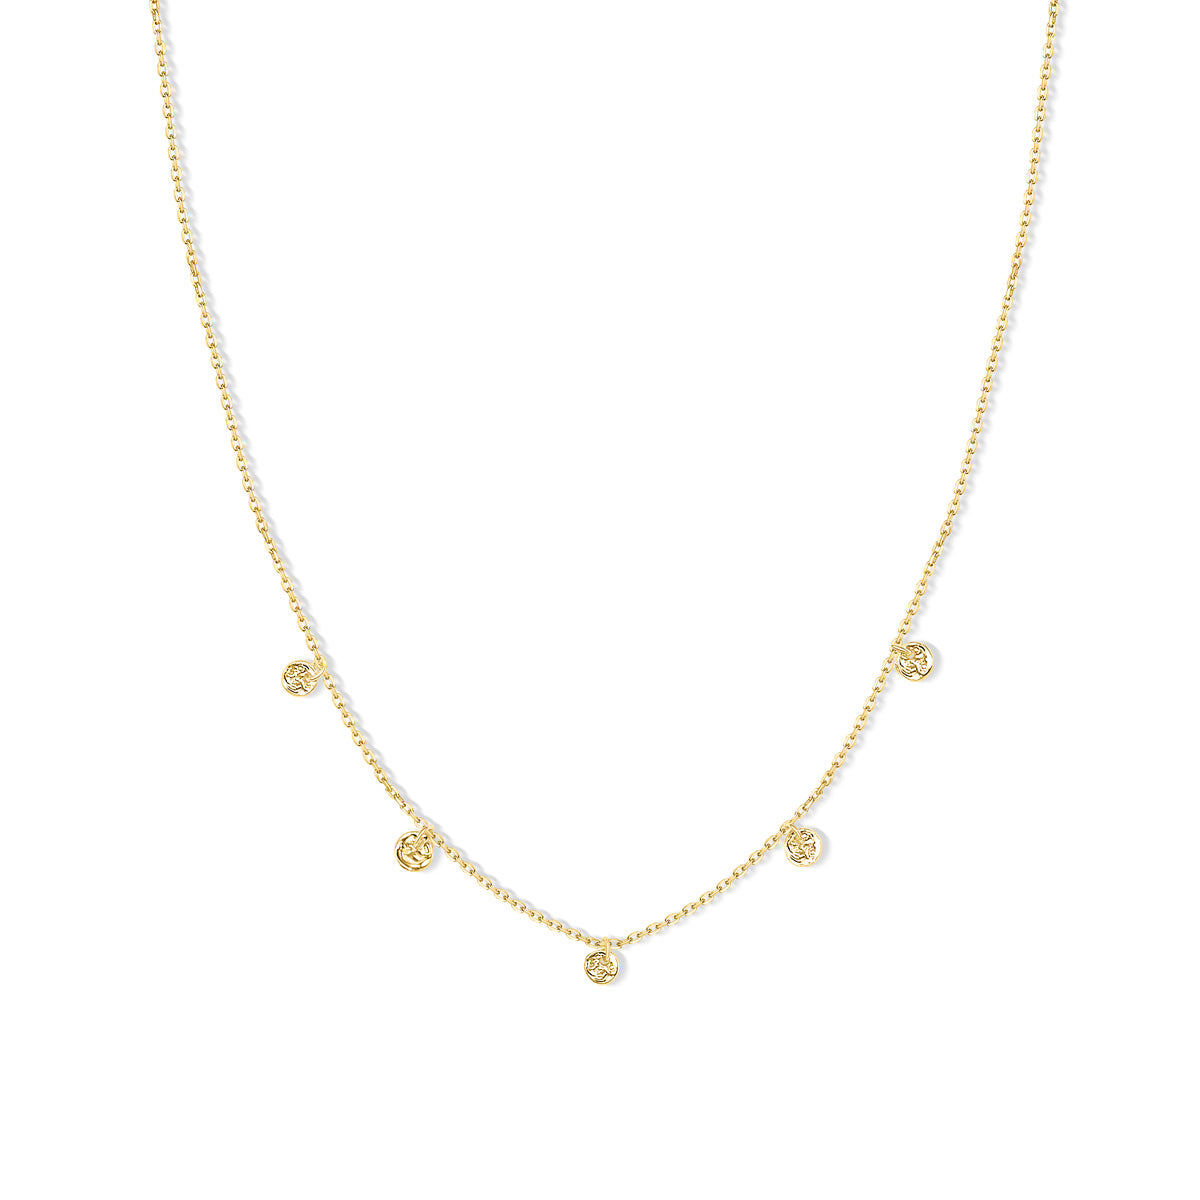 Gold chain necklace with pendants